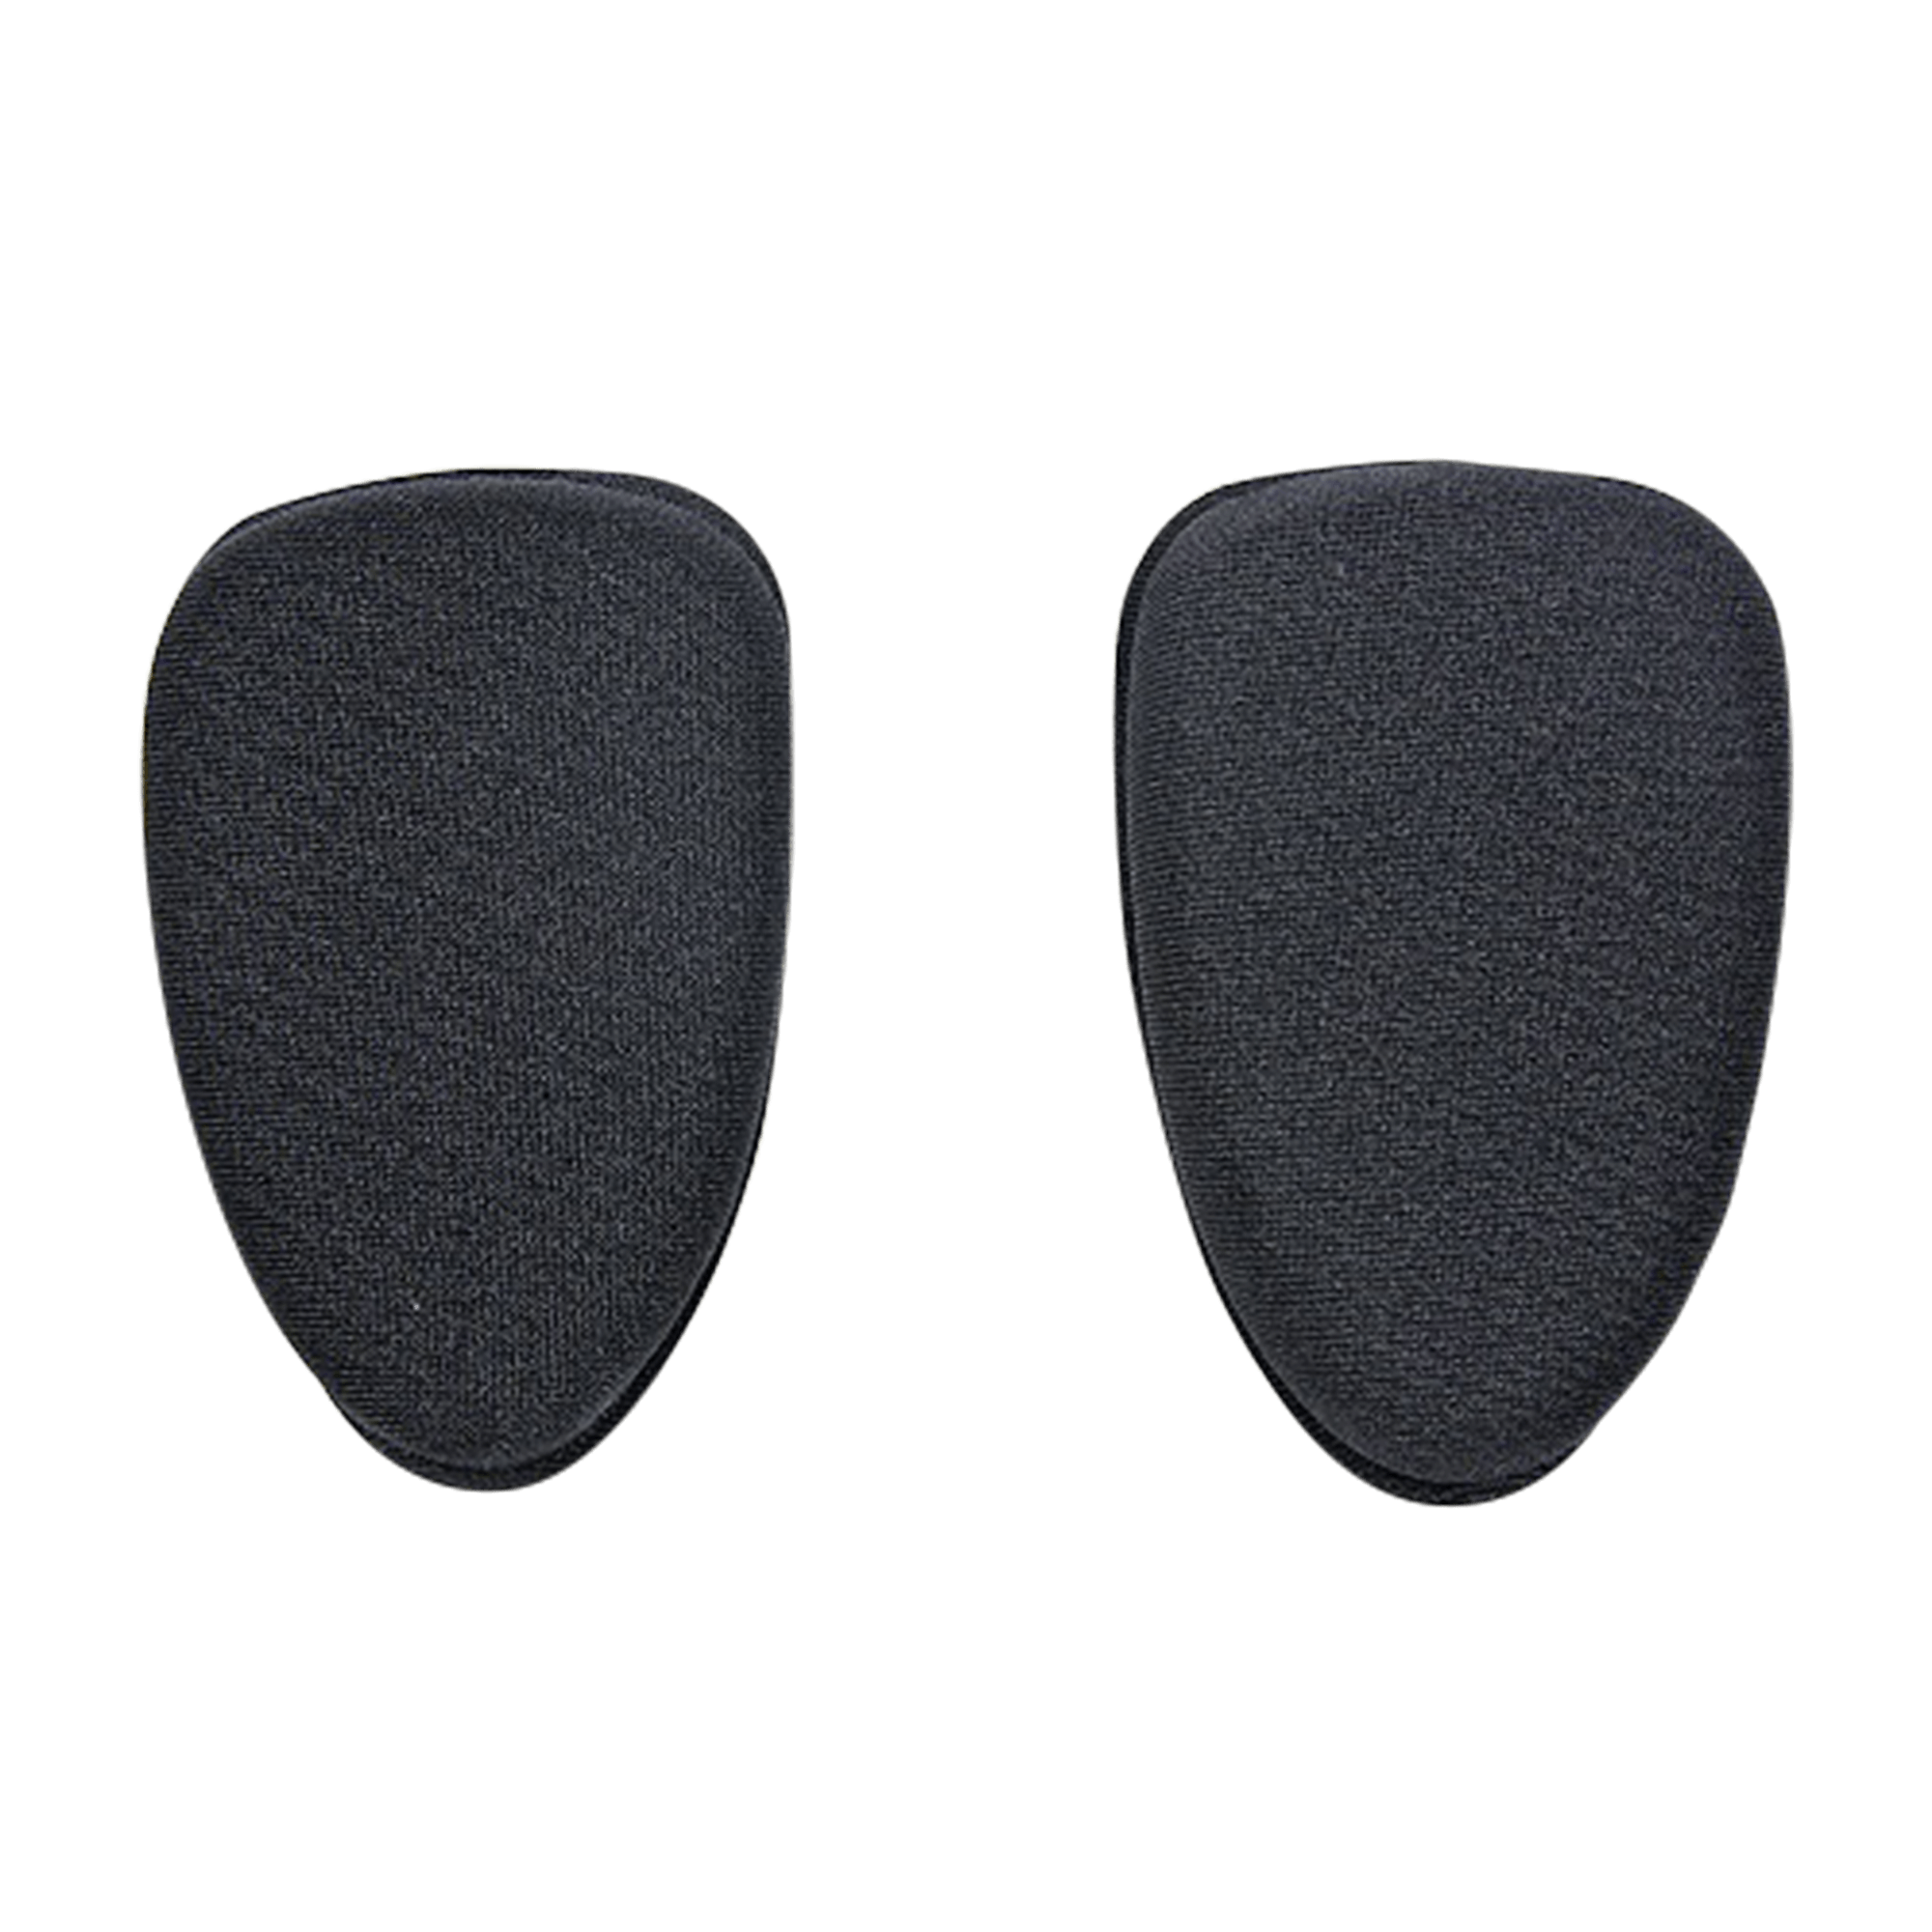 ATPT-AD900WING - Replacement headphone wing pads | Audio-Technica